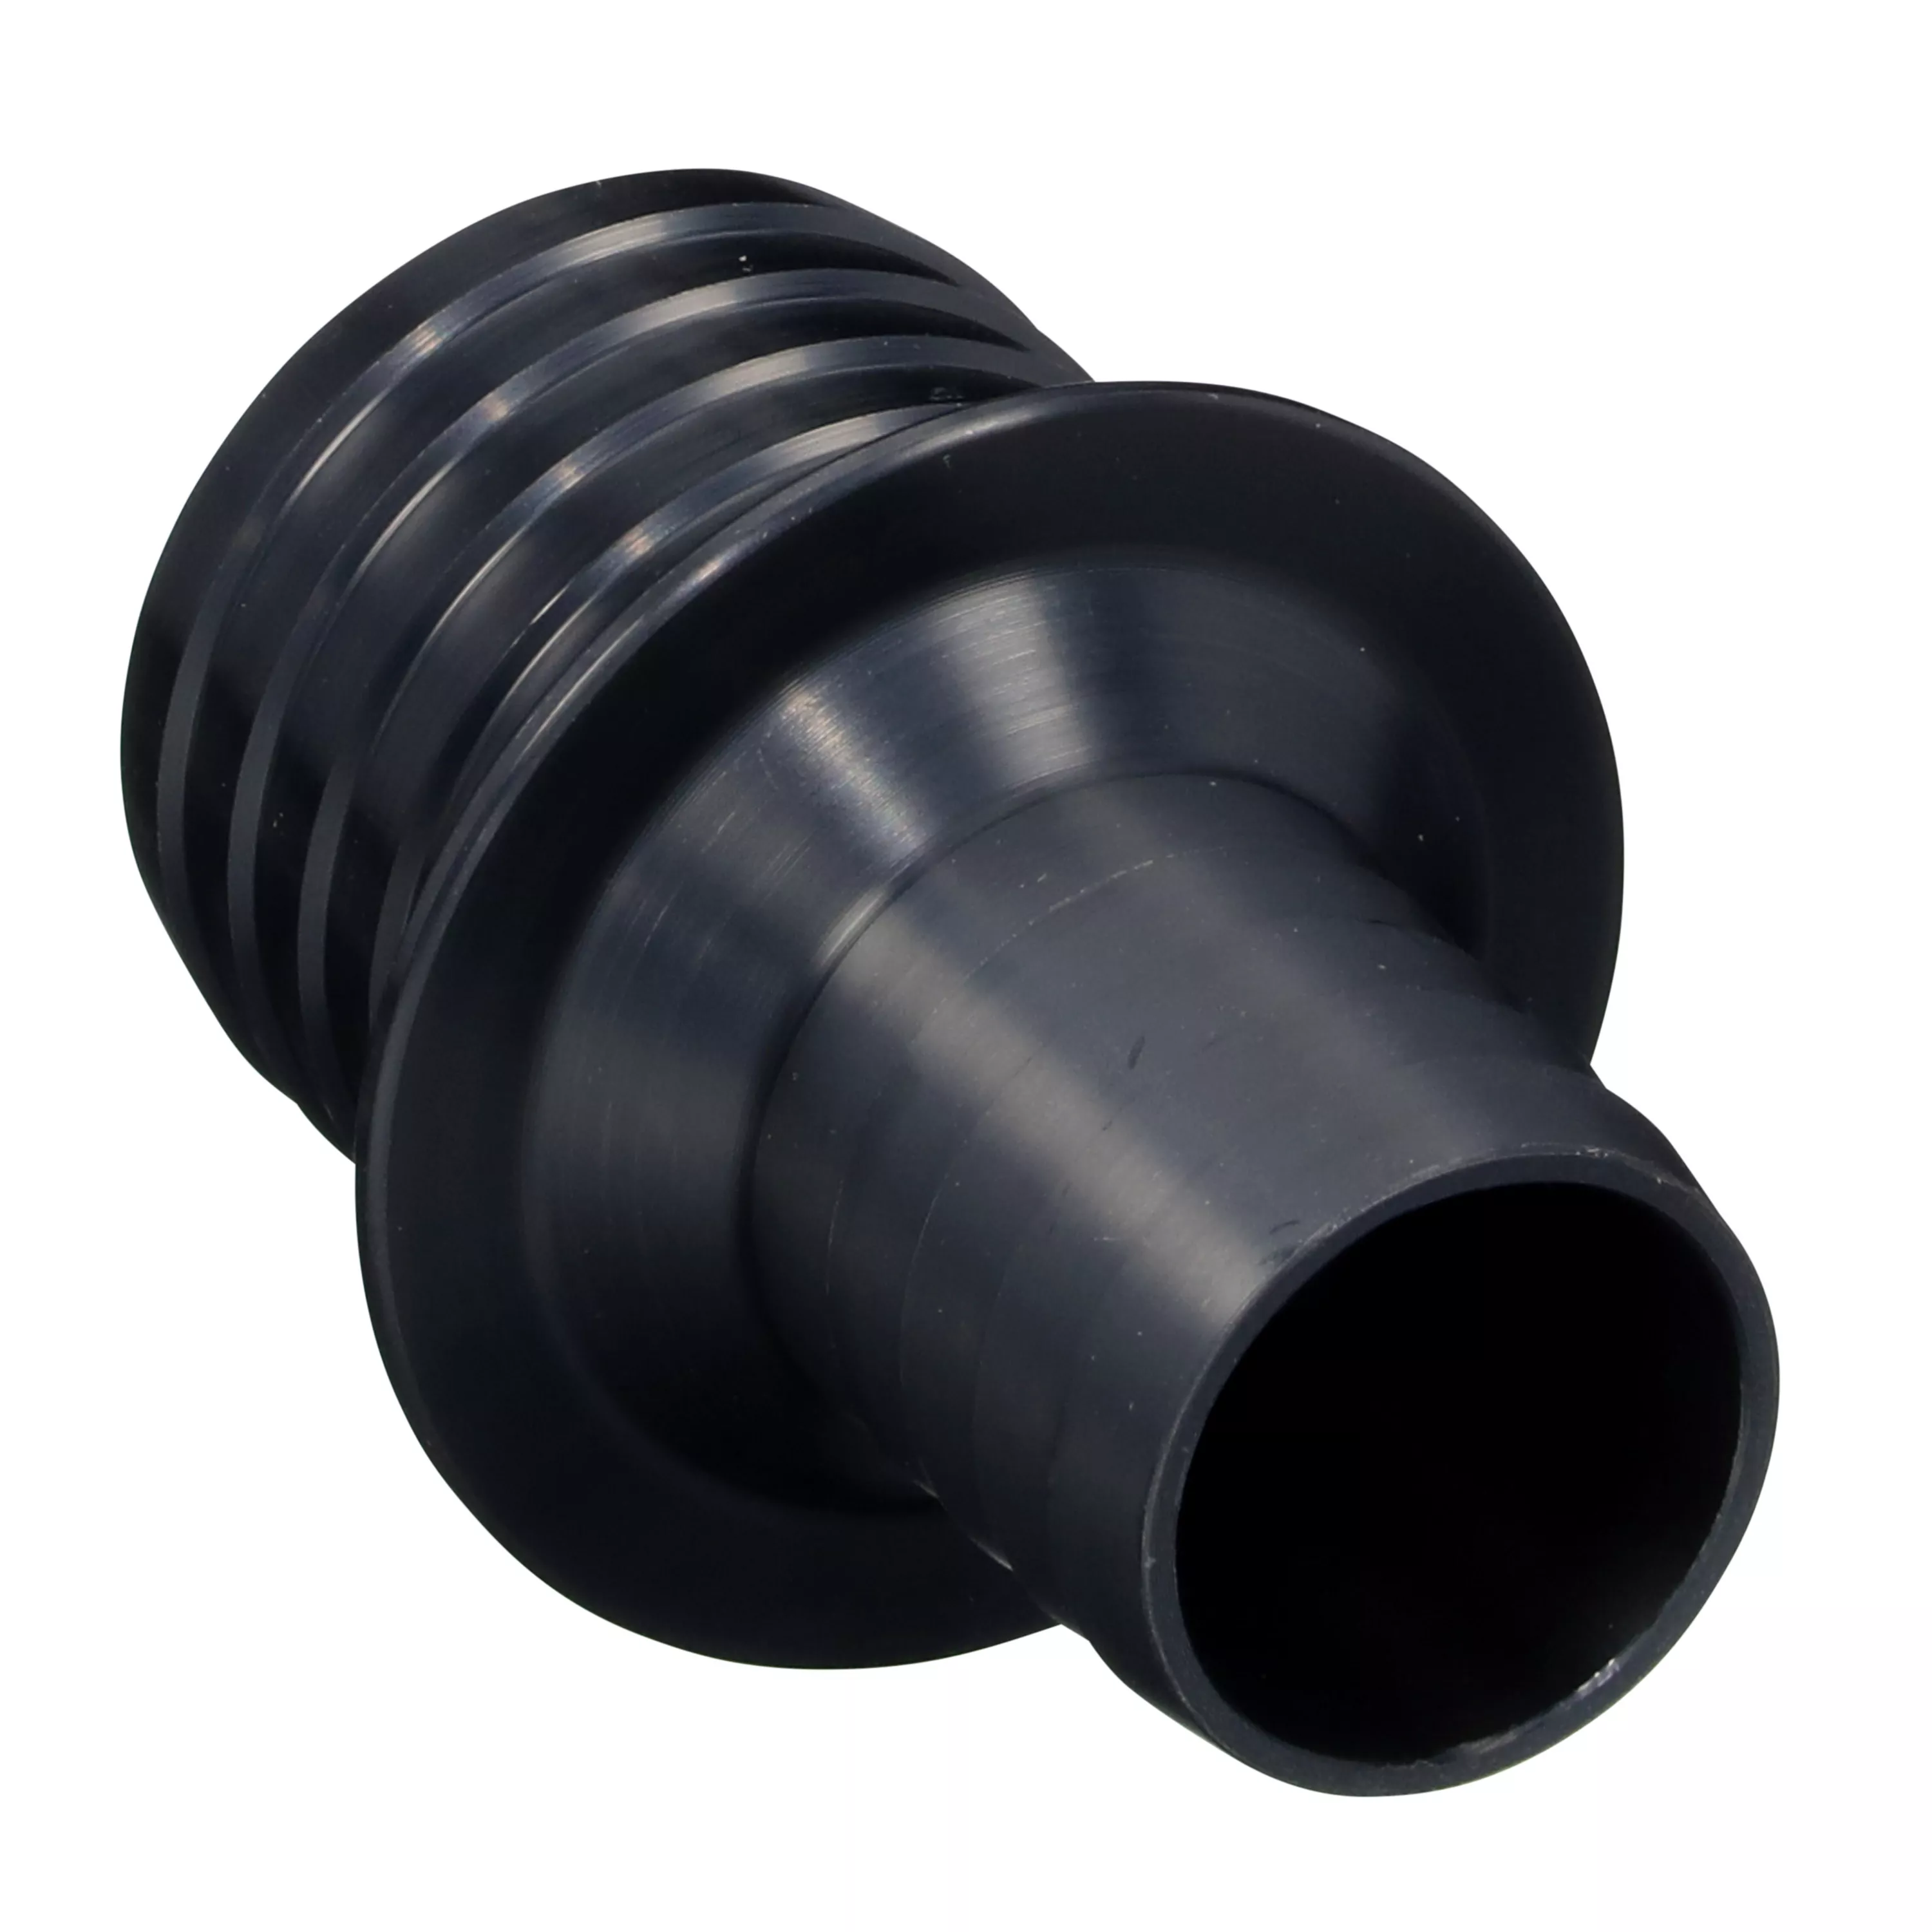 3M™ Vacuum Hose Adapter 30440, 1 in ID to 1-1/2 in ID